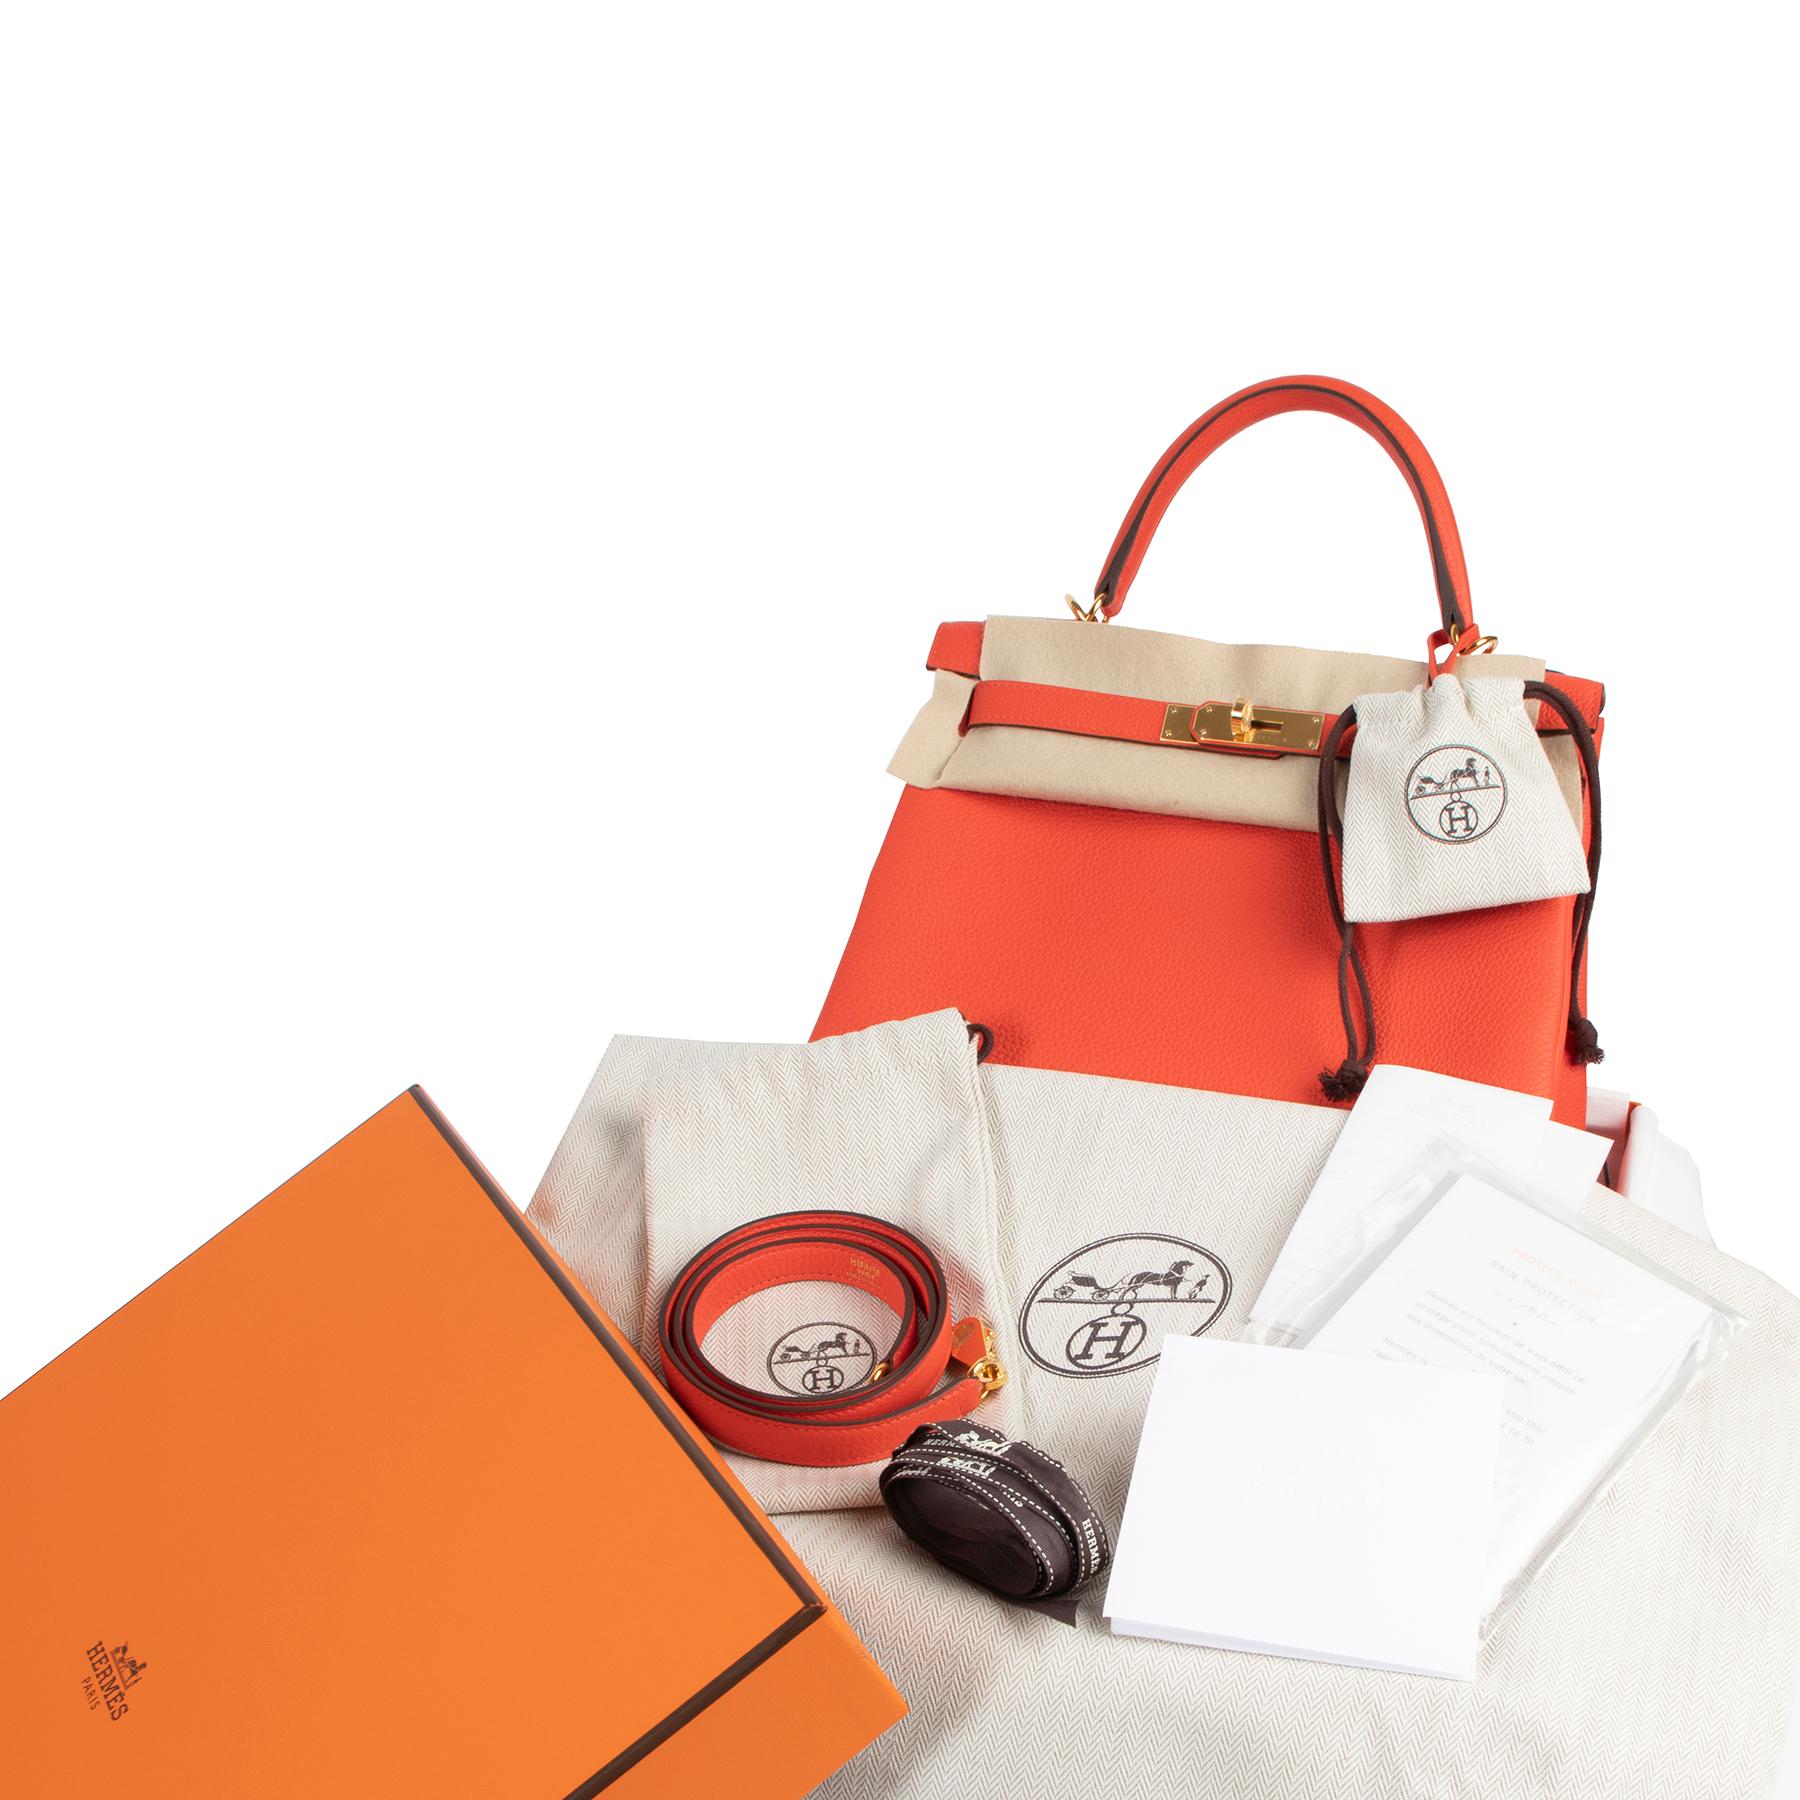 Never Used

Hermes Kelly 28 Togo Capucine GHW

Adding a colourful splash to the palette, this capucine is an alternative to the classic Hermès colors. 'Capucine'  is a very light shade of red with pink undertones.

This Hermes Kelly is a real